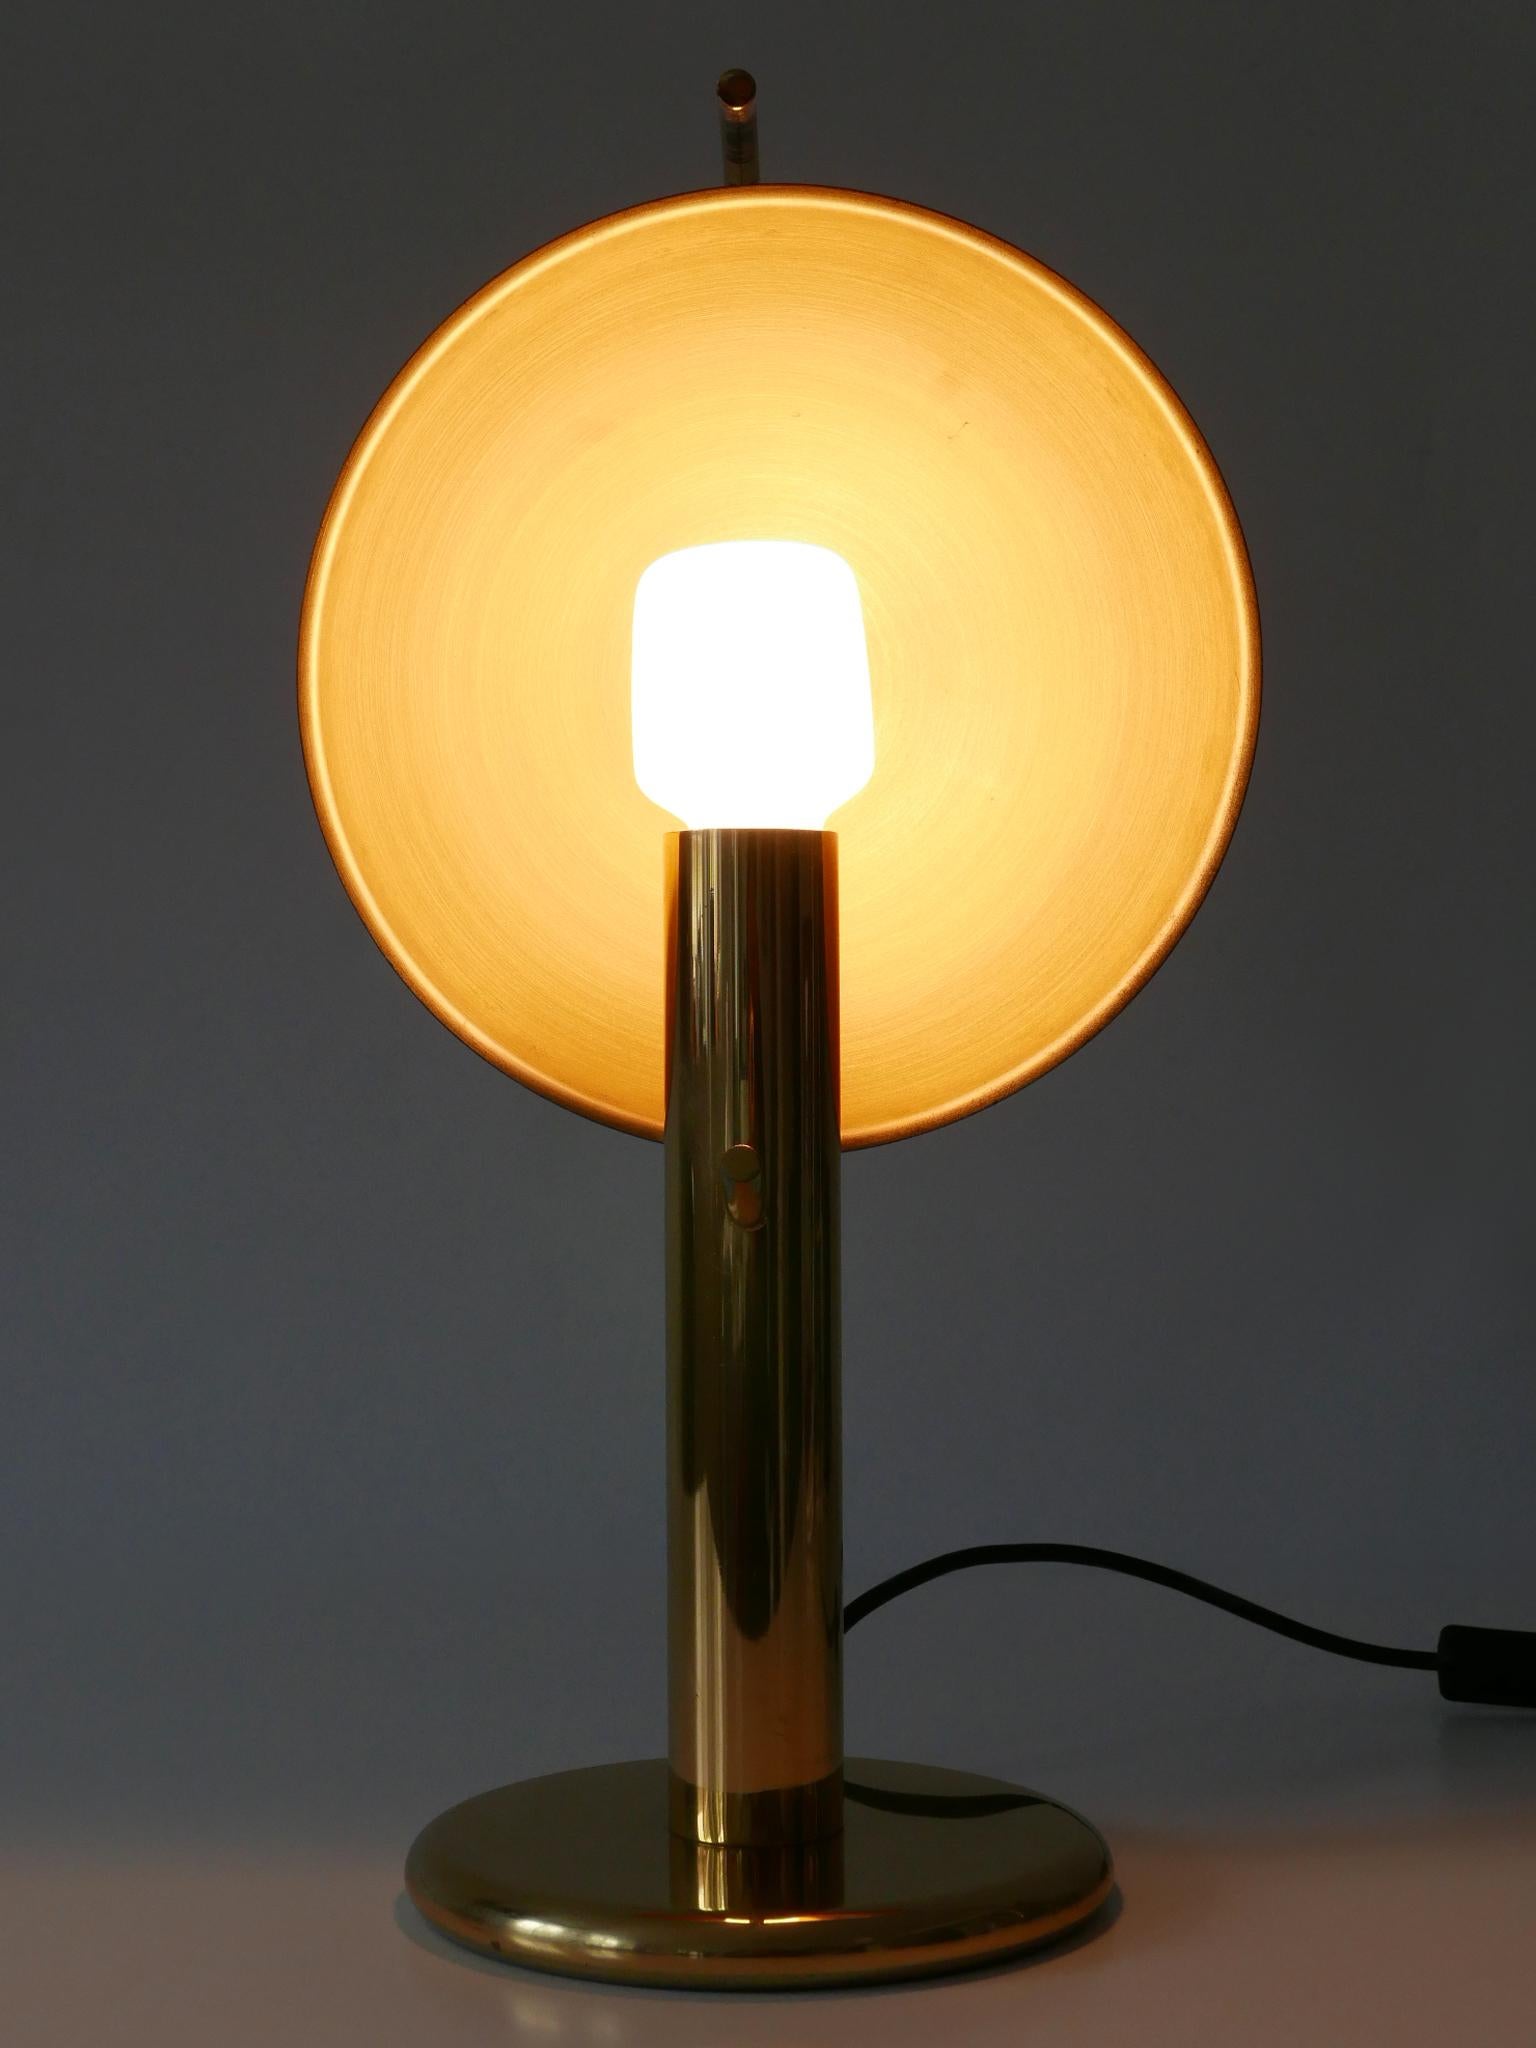 Exceptional Mid-Century Modern Brass Table Lamp by Gebrüder Cosack Germany 1960s For Sale 4